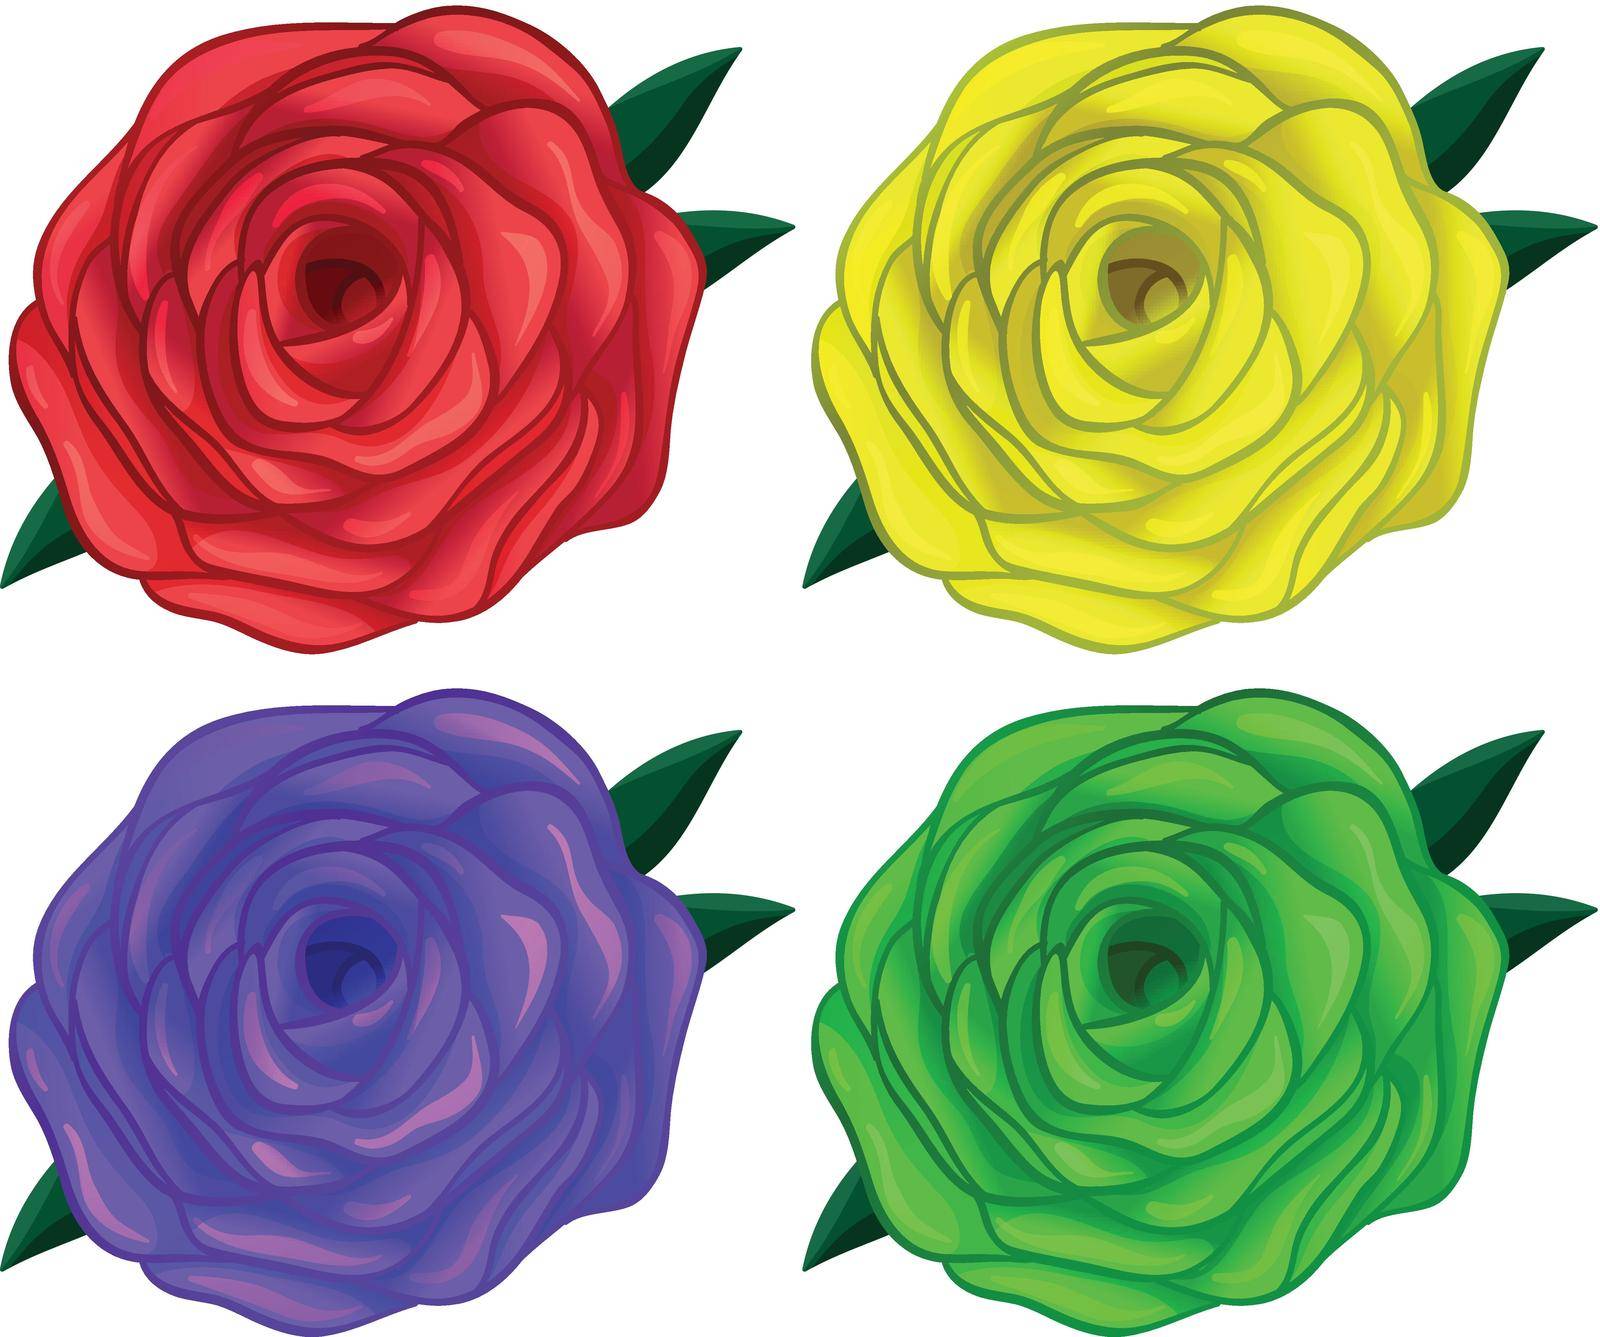 Four colorful roses by iimages